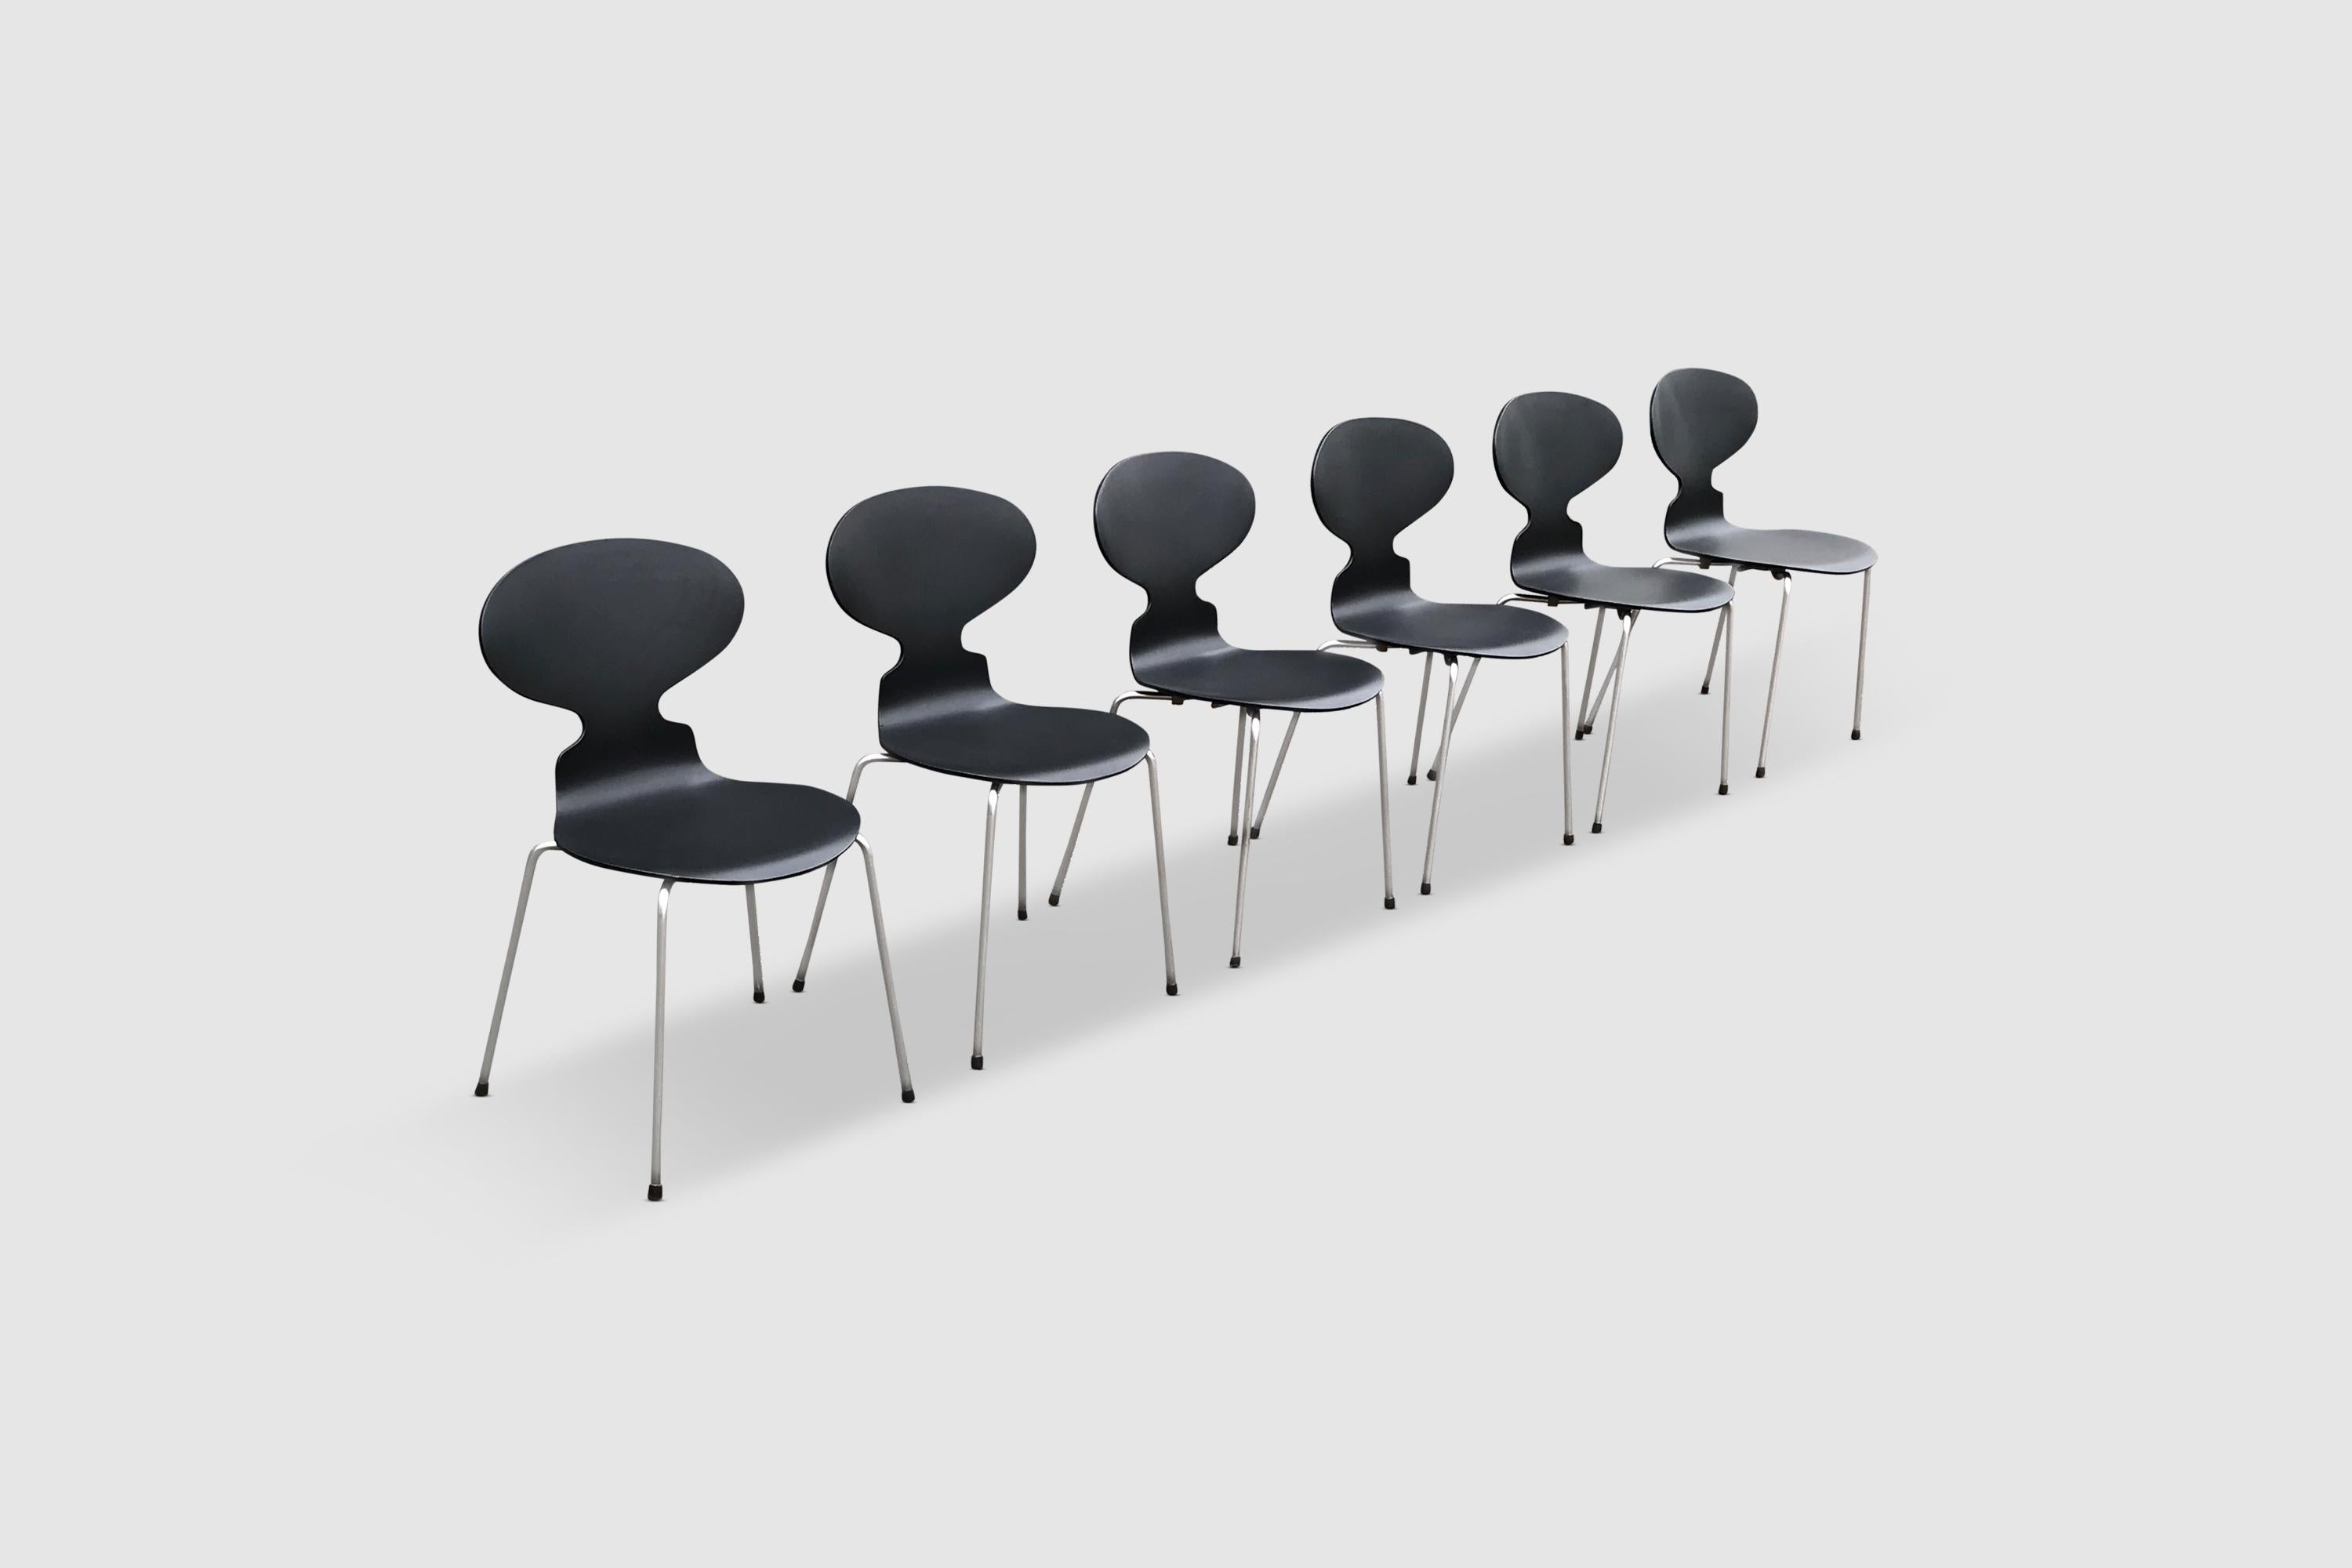 A set of well-known and renowned 3100 Ant chairs by Arne Jacobsen for Fritz Hansen. It concerns a second generation set from the 60s, still with the early iron plates below the seat.

The set consists of multiplex plywood that has been painted black